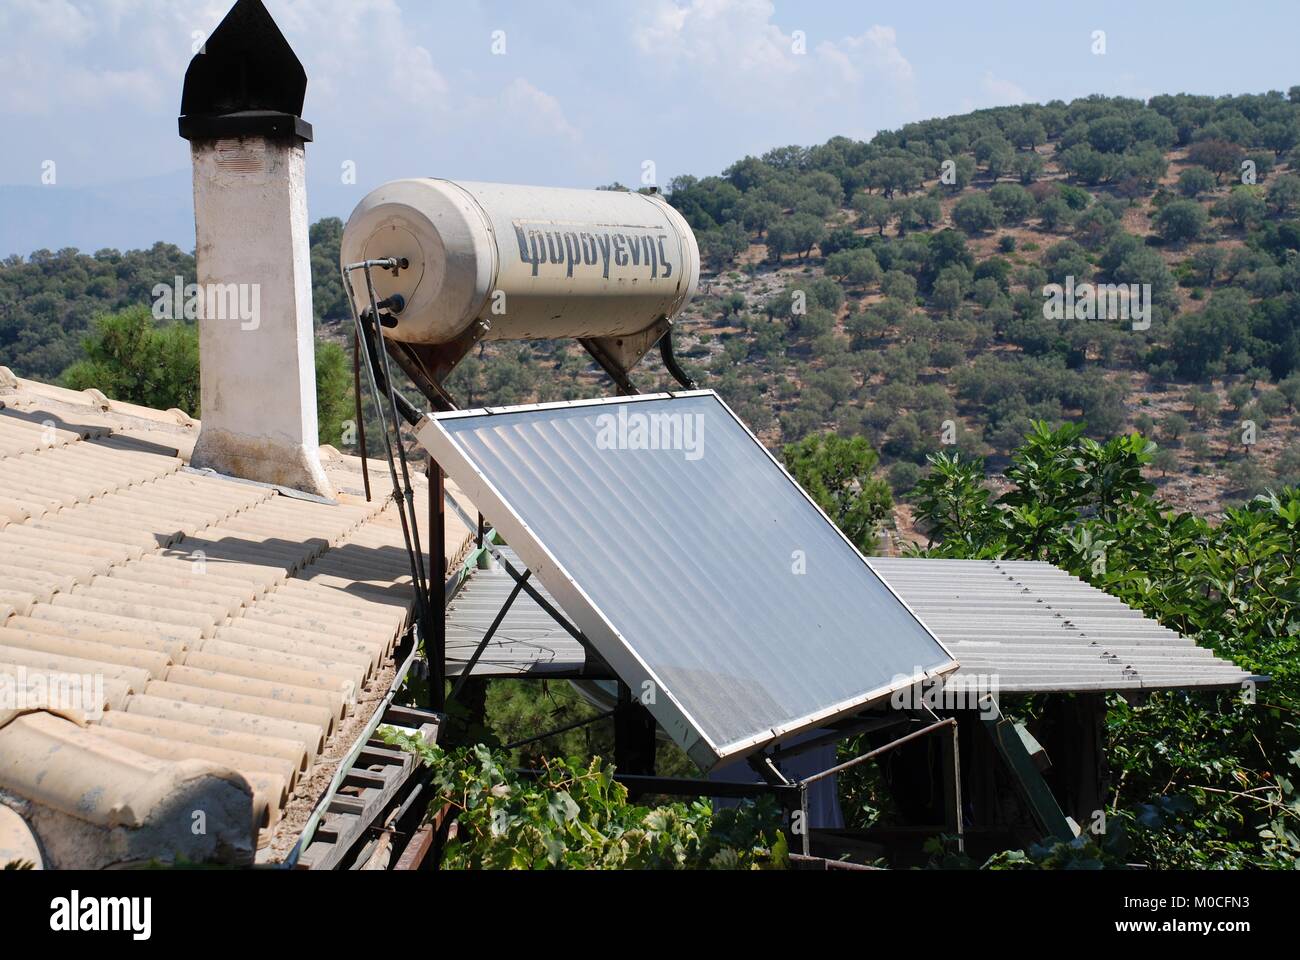 A solar energy panel and water tank on a roof at Spartohori on the Greek island of Meganissi on August 31, 2008. Stock Photo